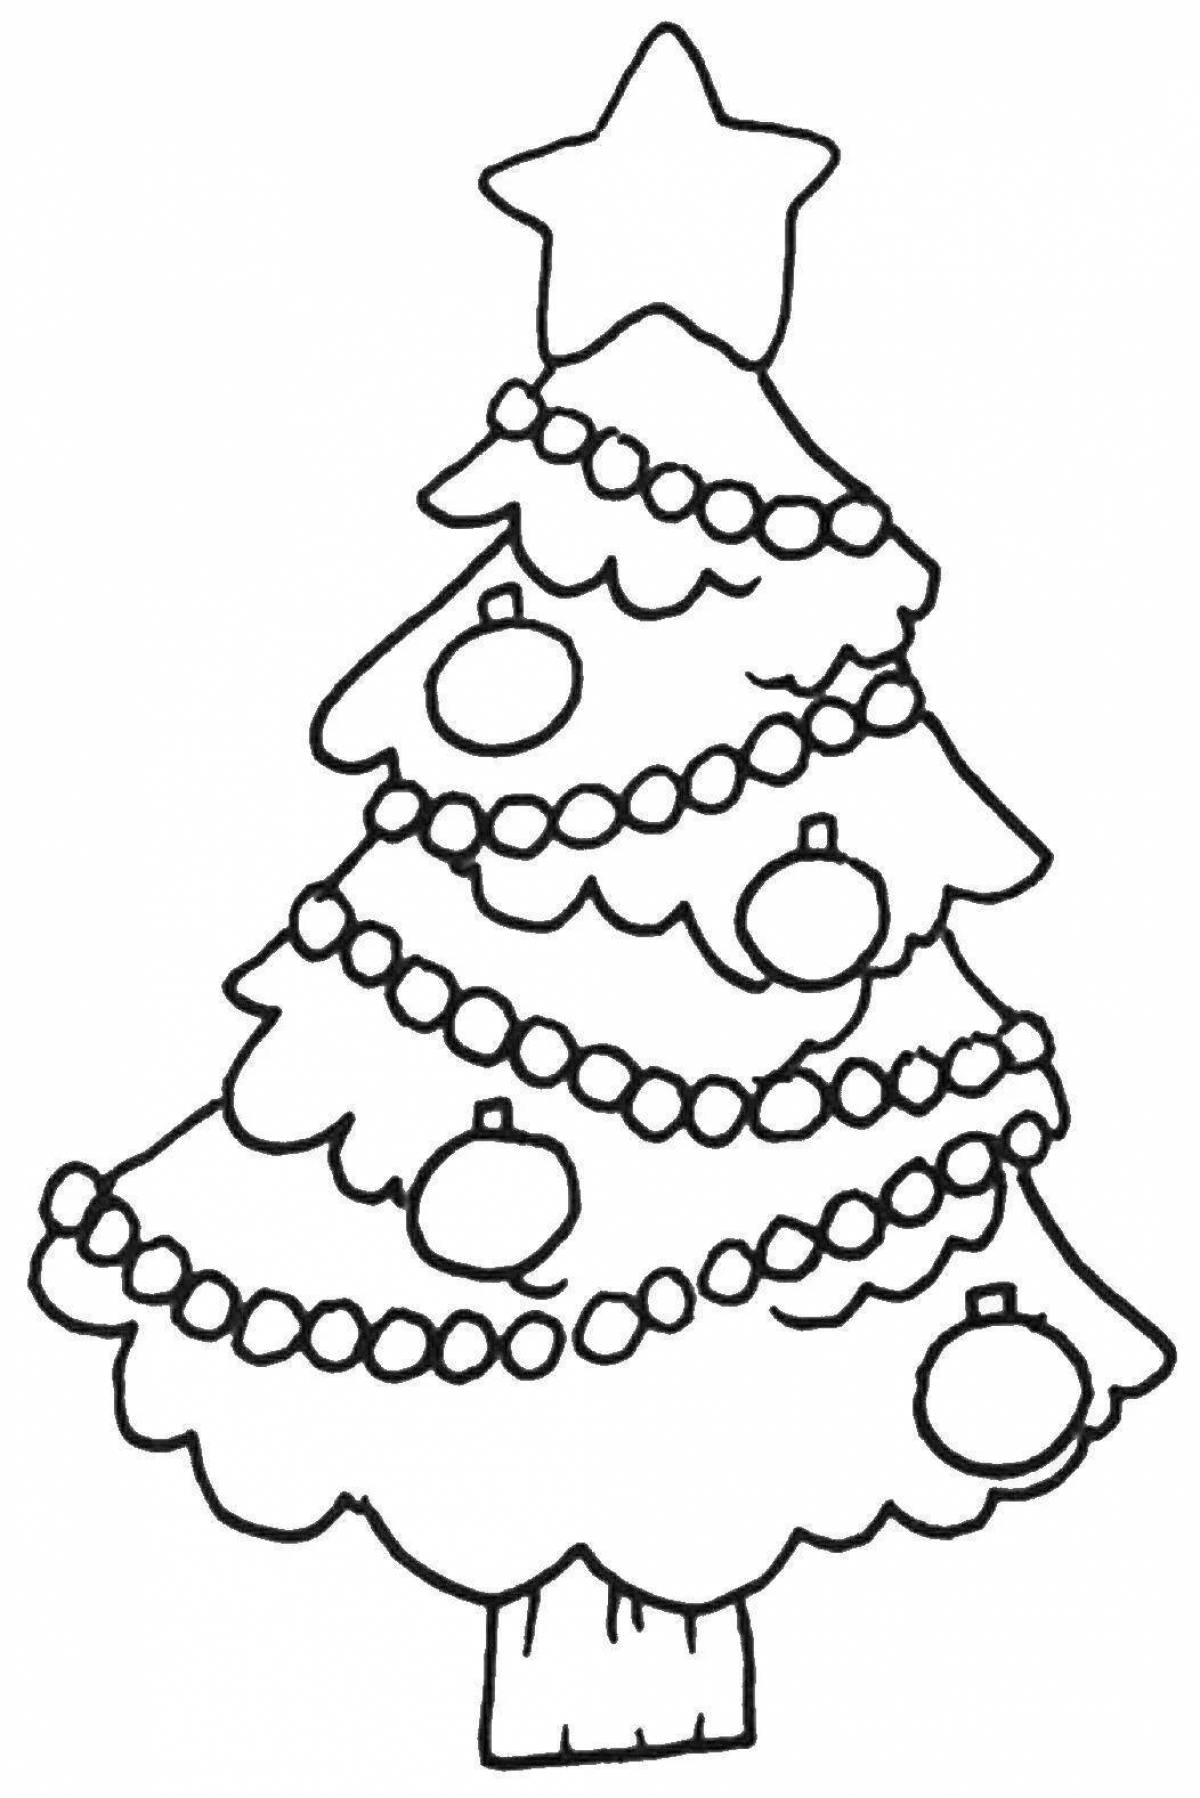 Calm tree coloring page